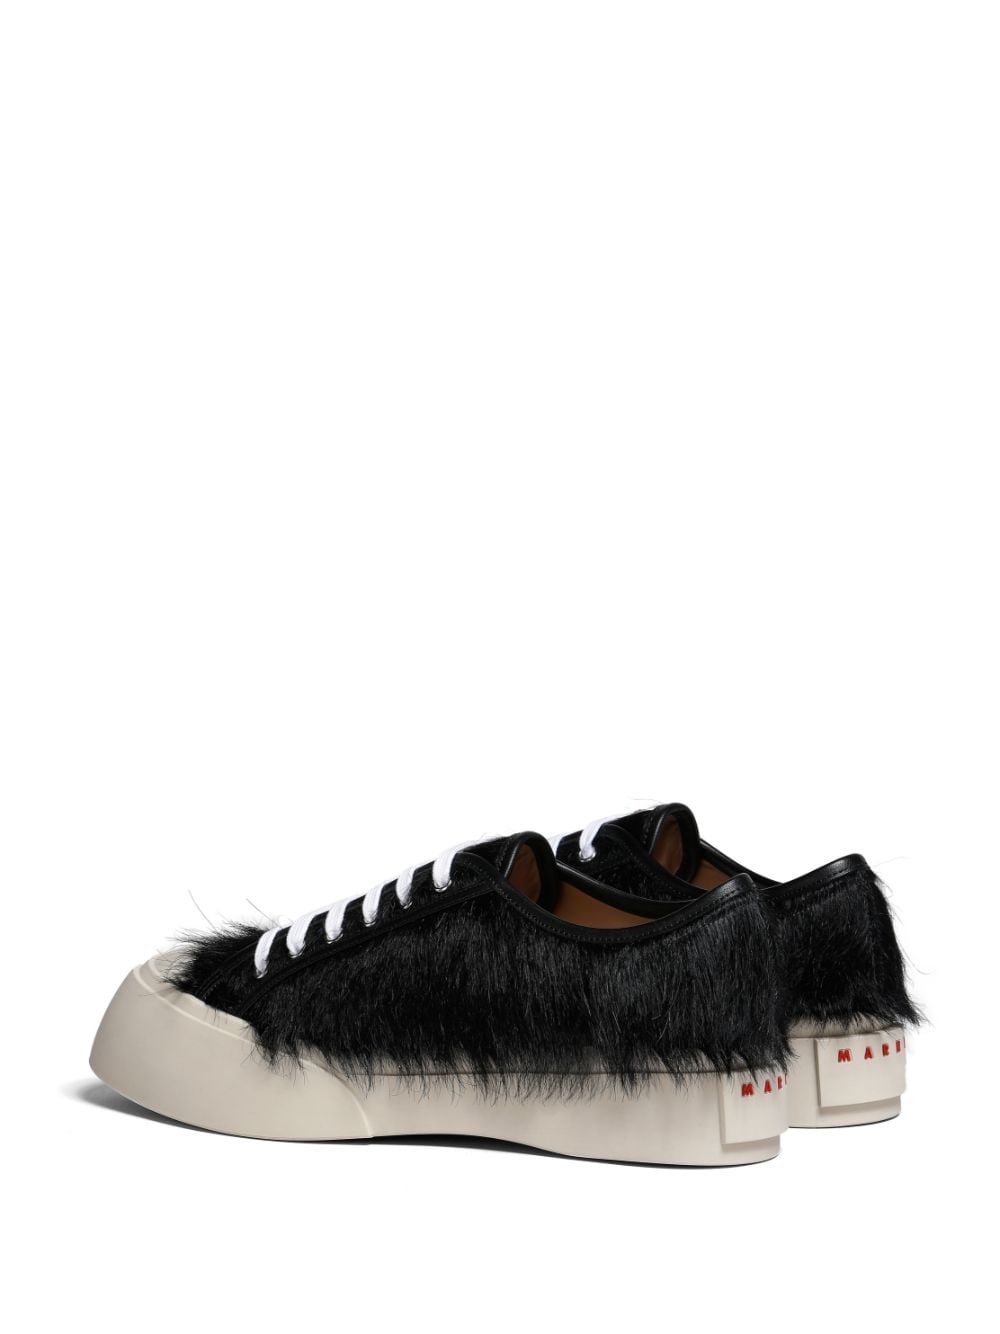 Marni Pablo calf-hair lace-up Sneakers - Farfetch